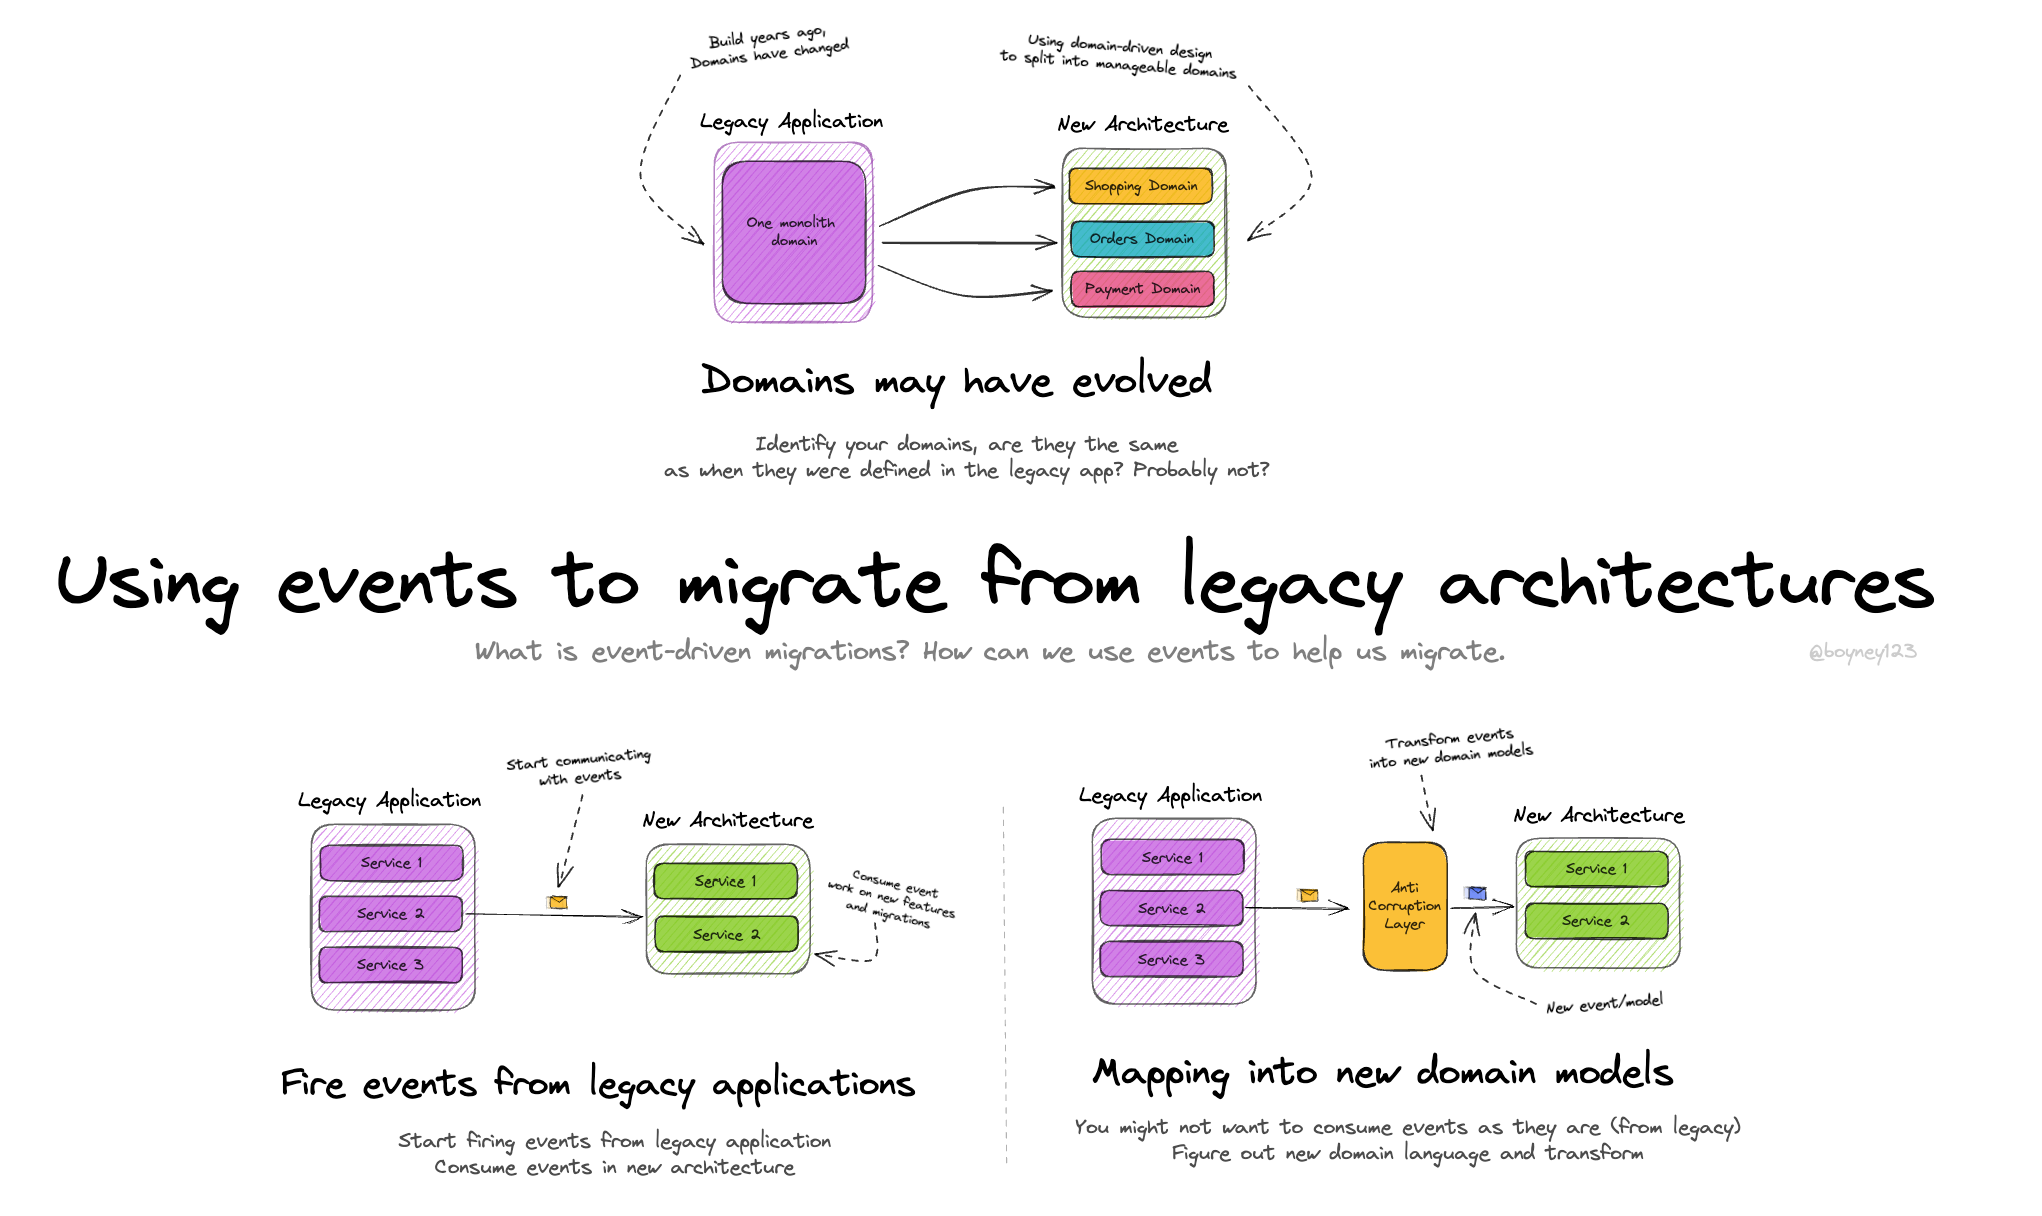 Using events to migrate from legacy architectures